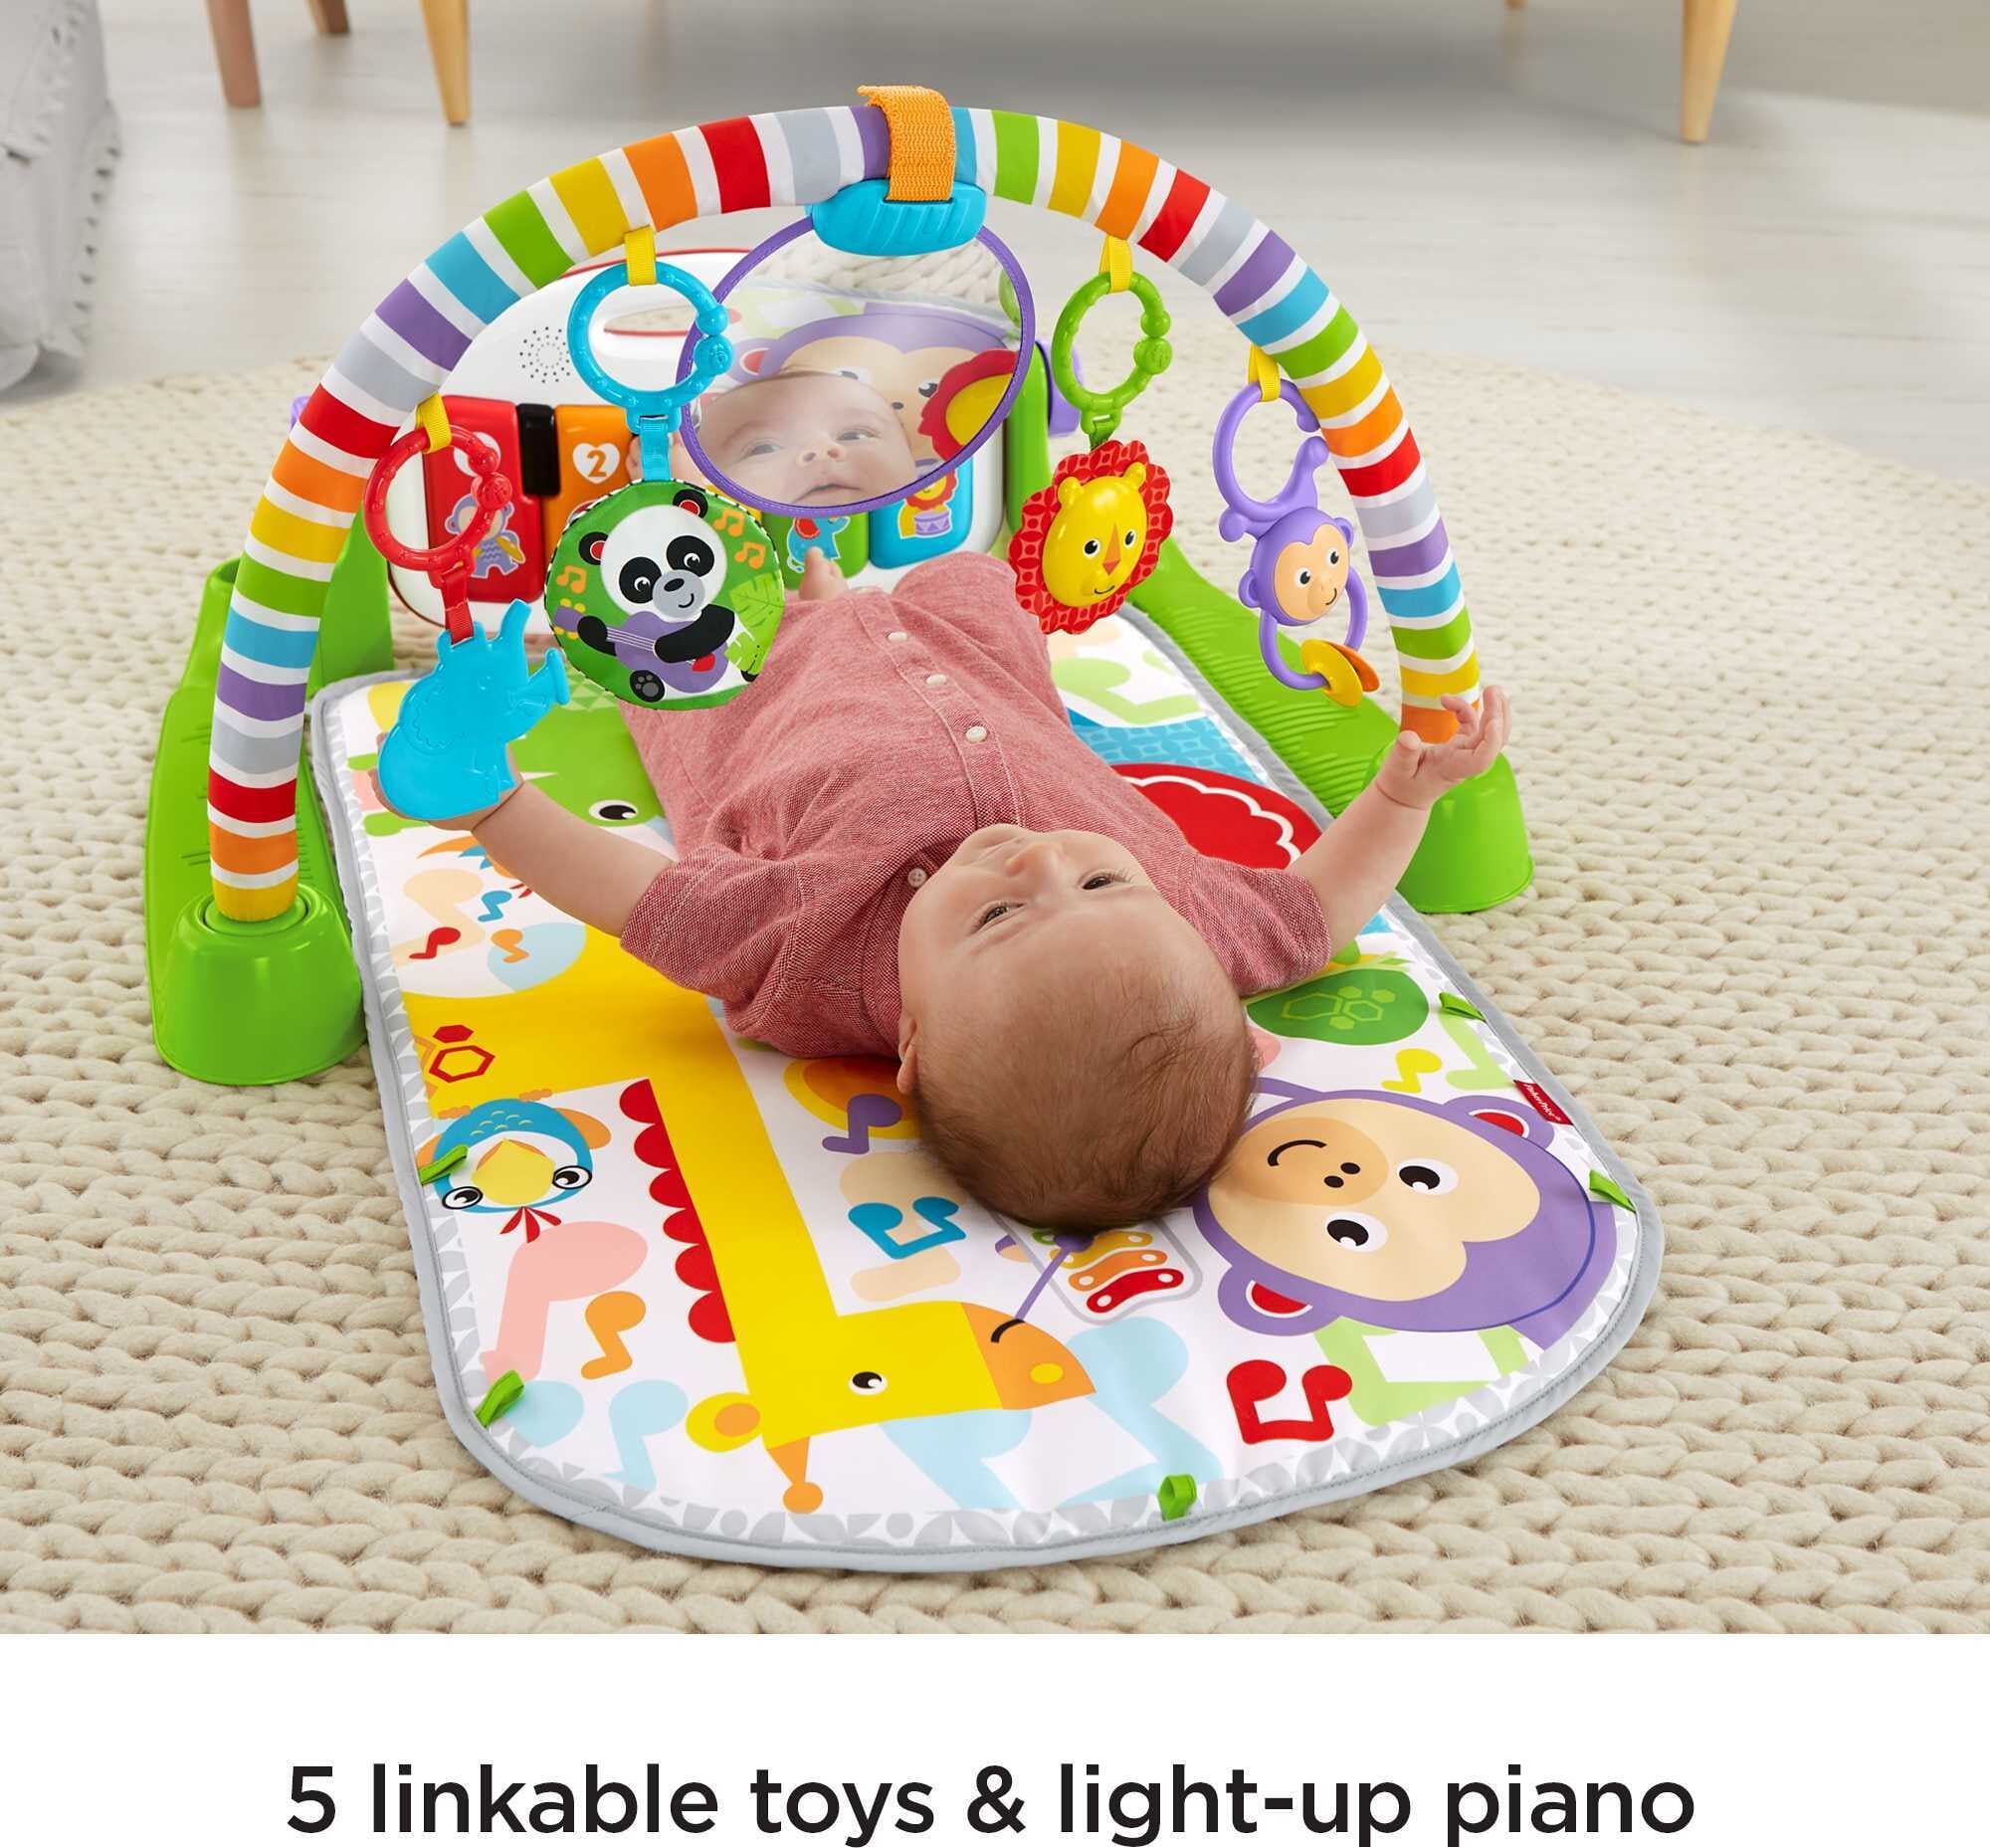 Fisher-Price Deluxe Kick & Play Removable Piano Gym, Green - 3